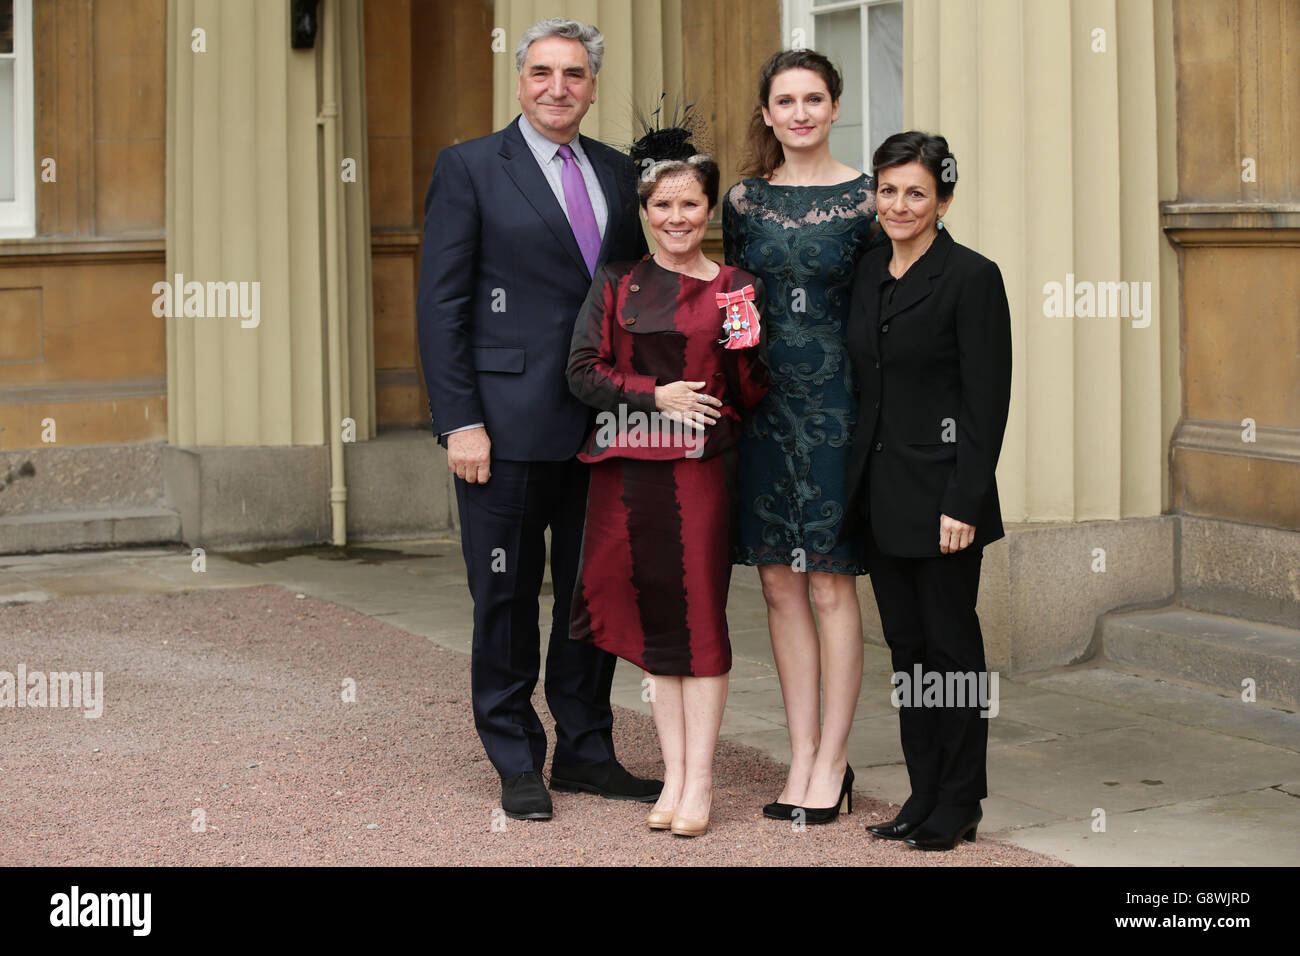 Actress Imelda Staunton (second left) poses with her husband Jim Carter, daughter Bessie Carter (second right) and her friend Karena Franses she received a CBE from the Duke of Cambridge for services to drama at an investiture ceremony at Buckingham Palace, London. Stock Photo